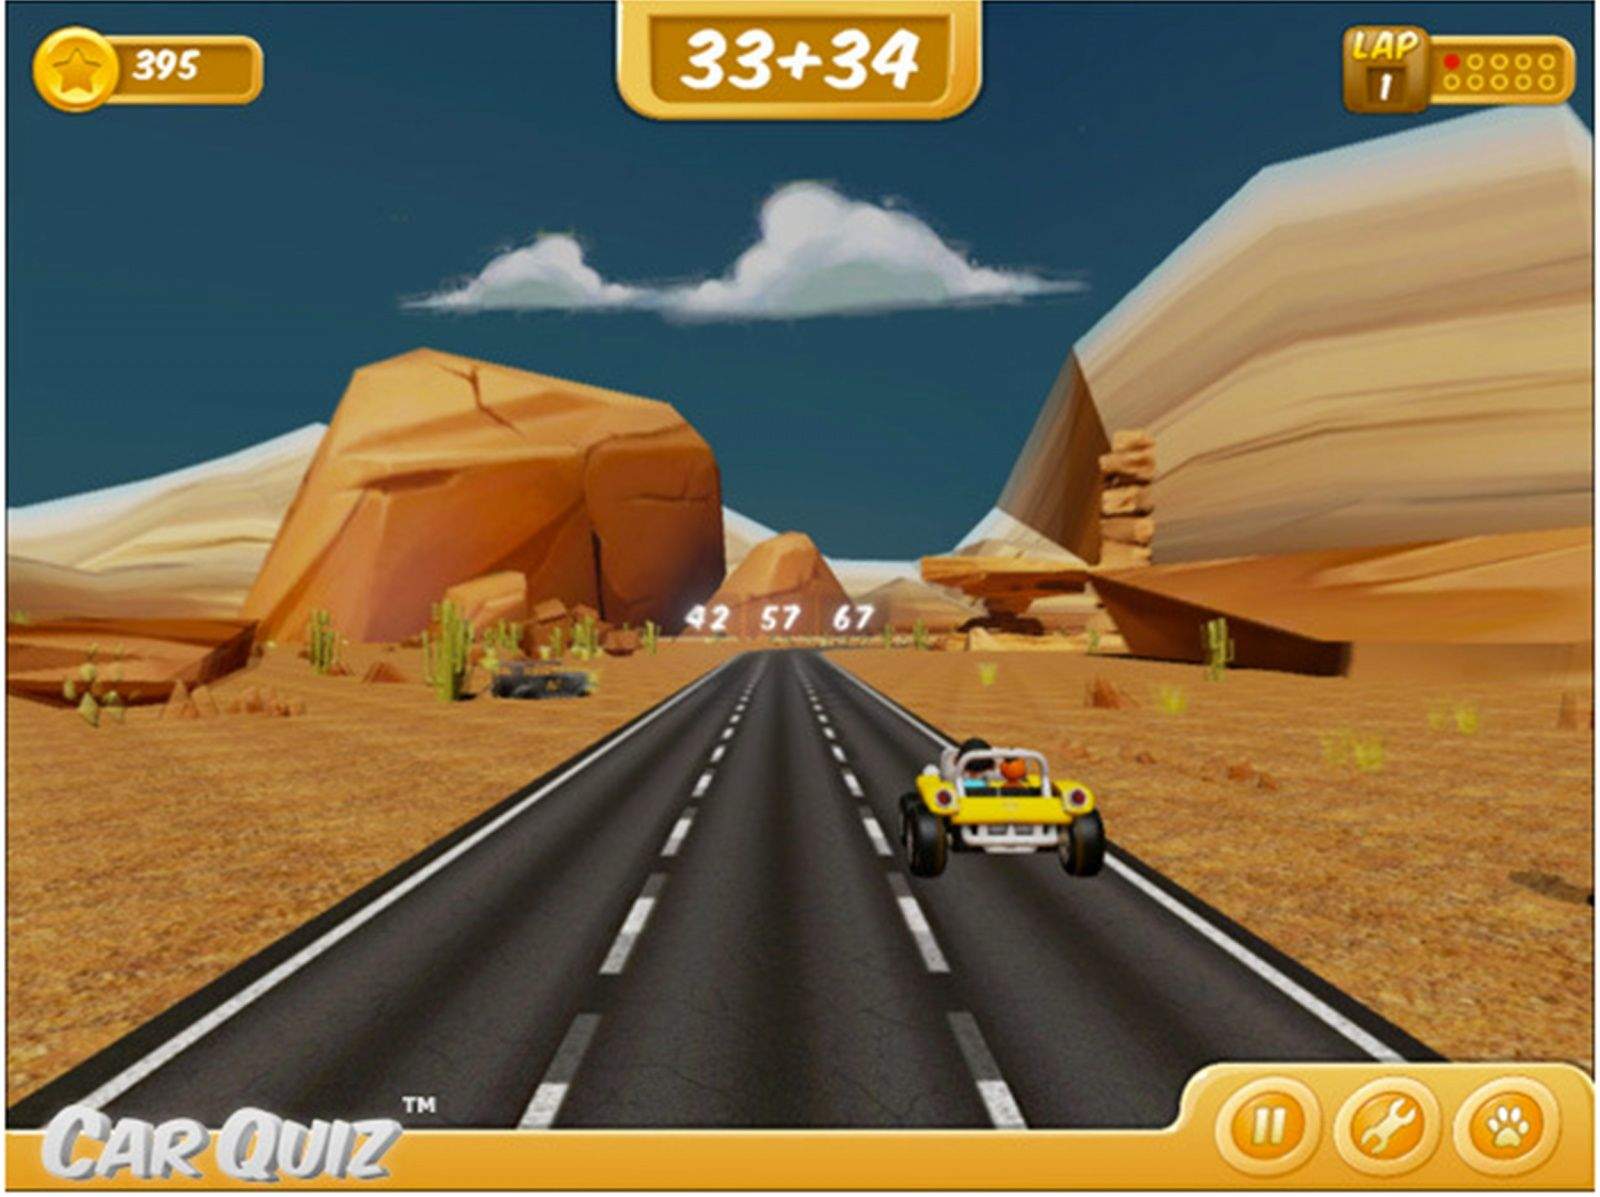 A scene from the math game CarQuiz, which asks drivers to answer math questions, swiping a finger to move to the lane with the correct answer. Photo: Smile More Studios